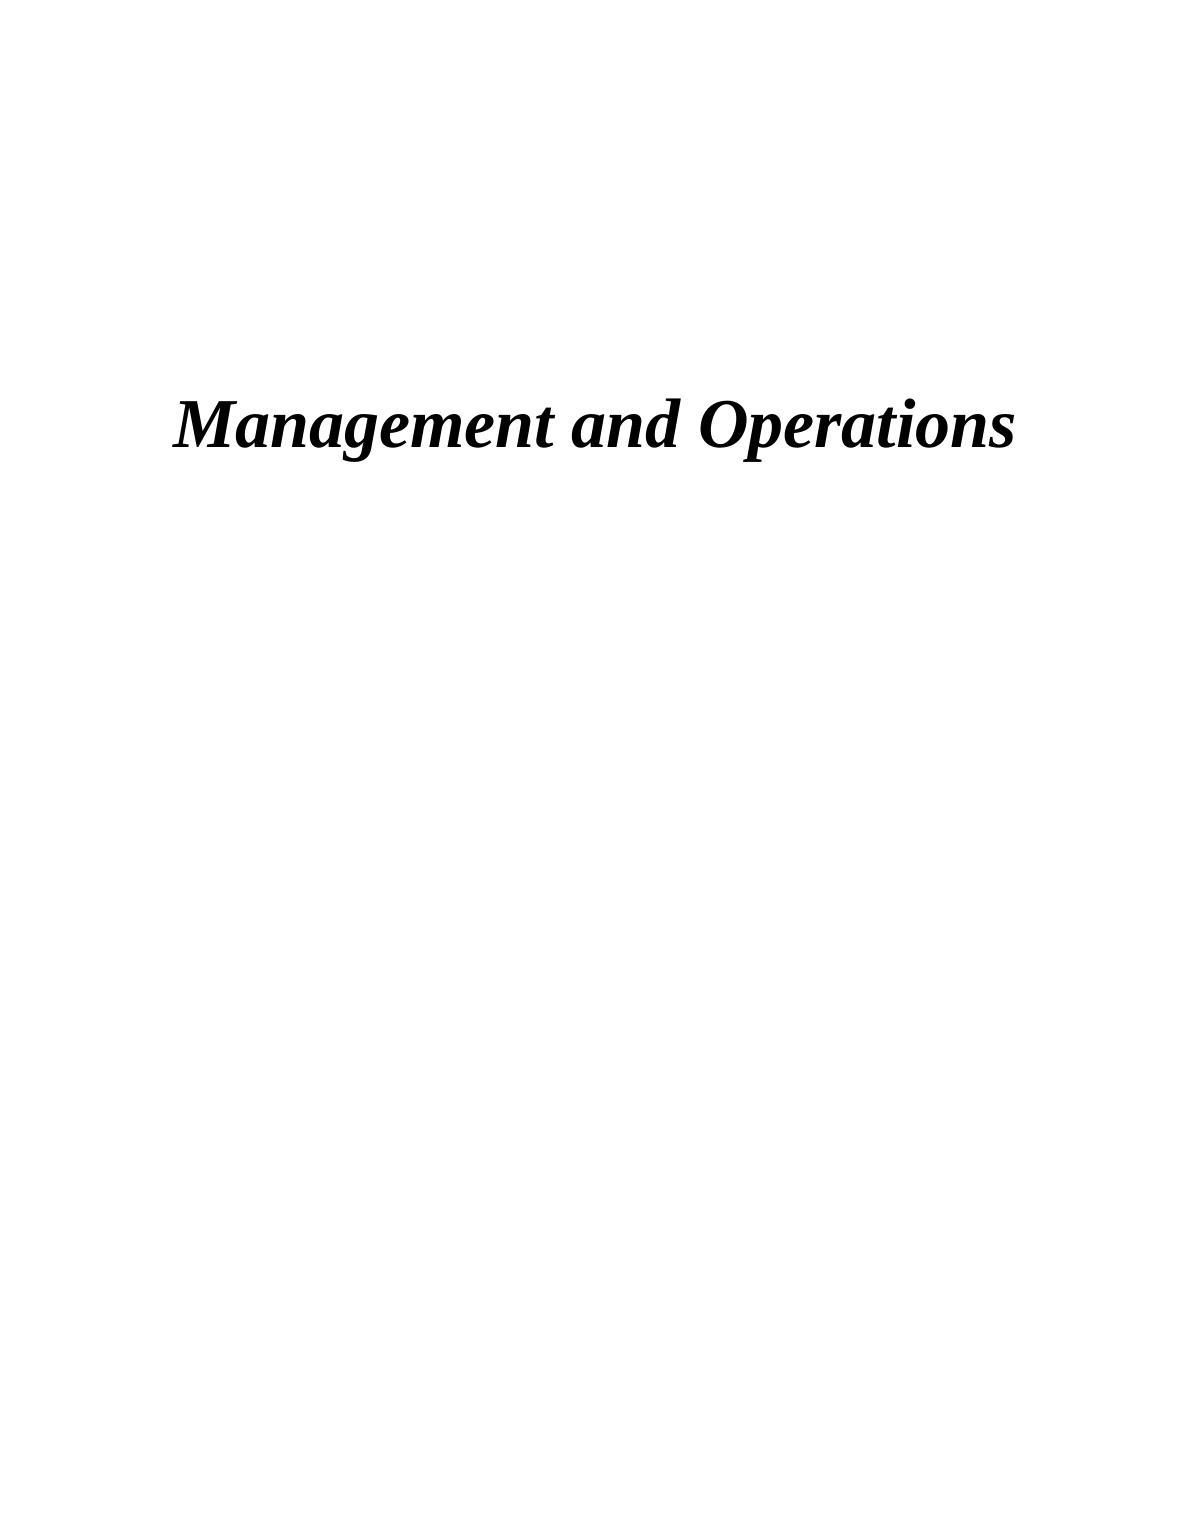 Management and Operations of Marks and Spencer : Assignment_1